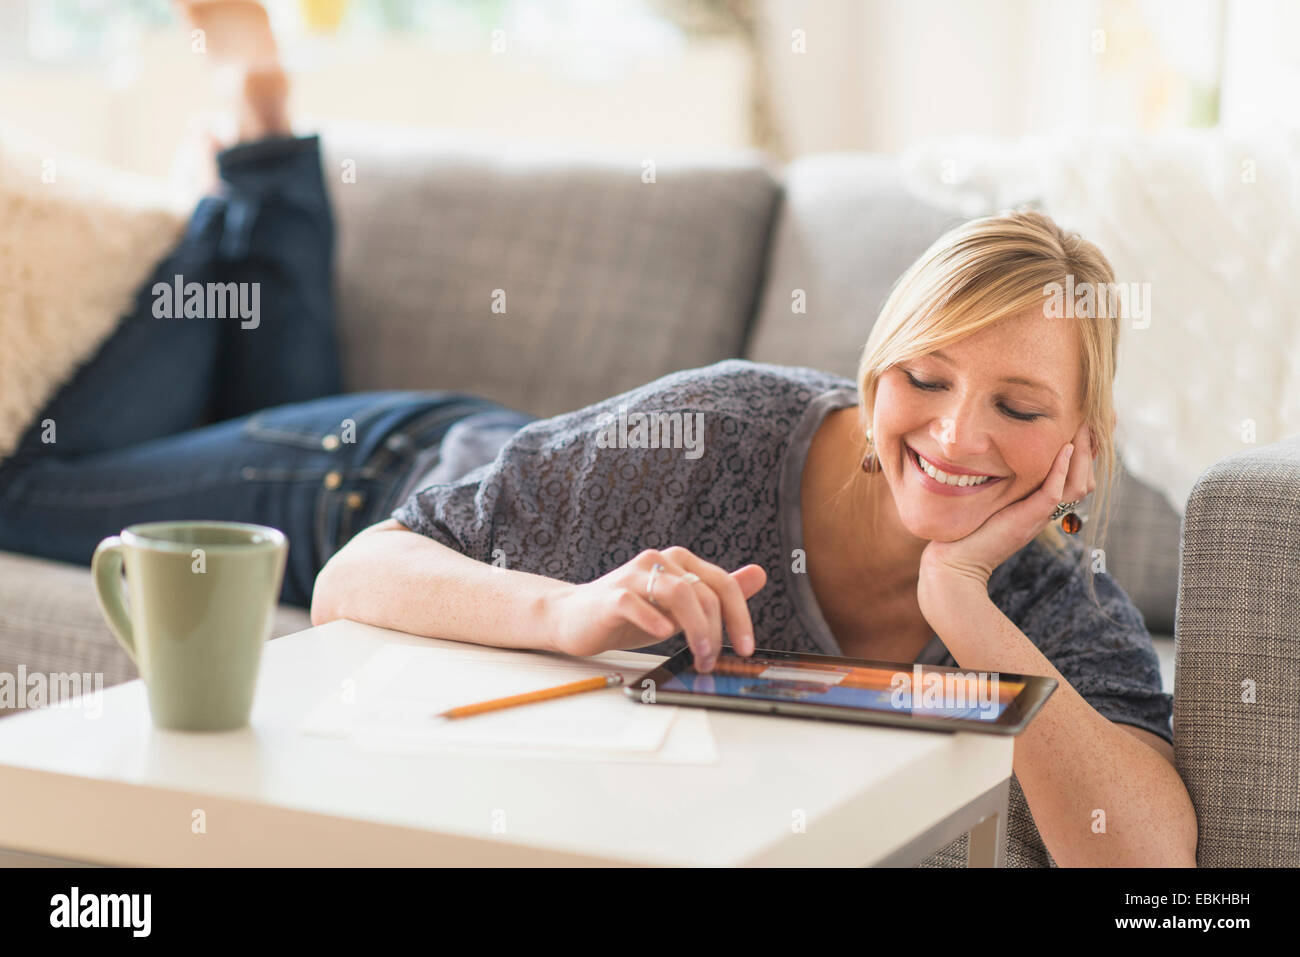 Woman on sofa with tablet pc Banque D'Images